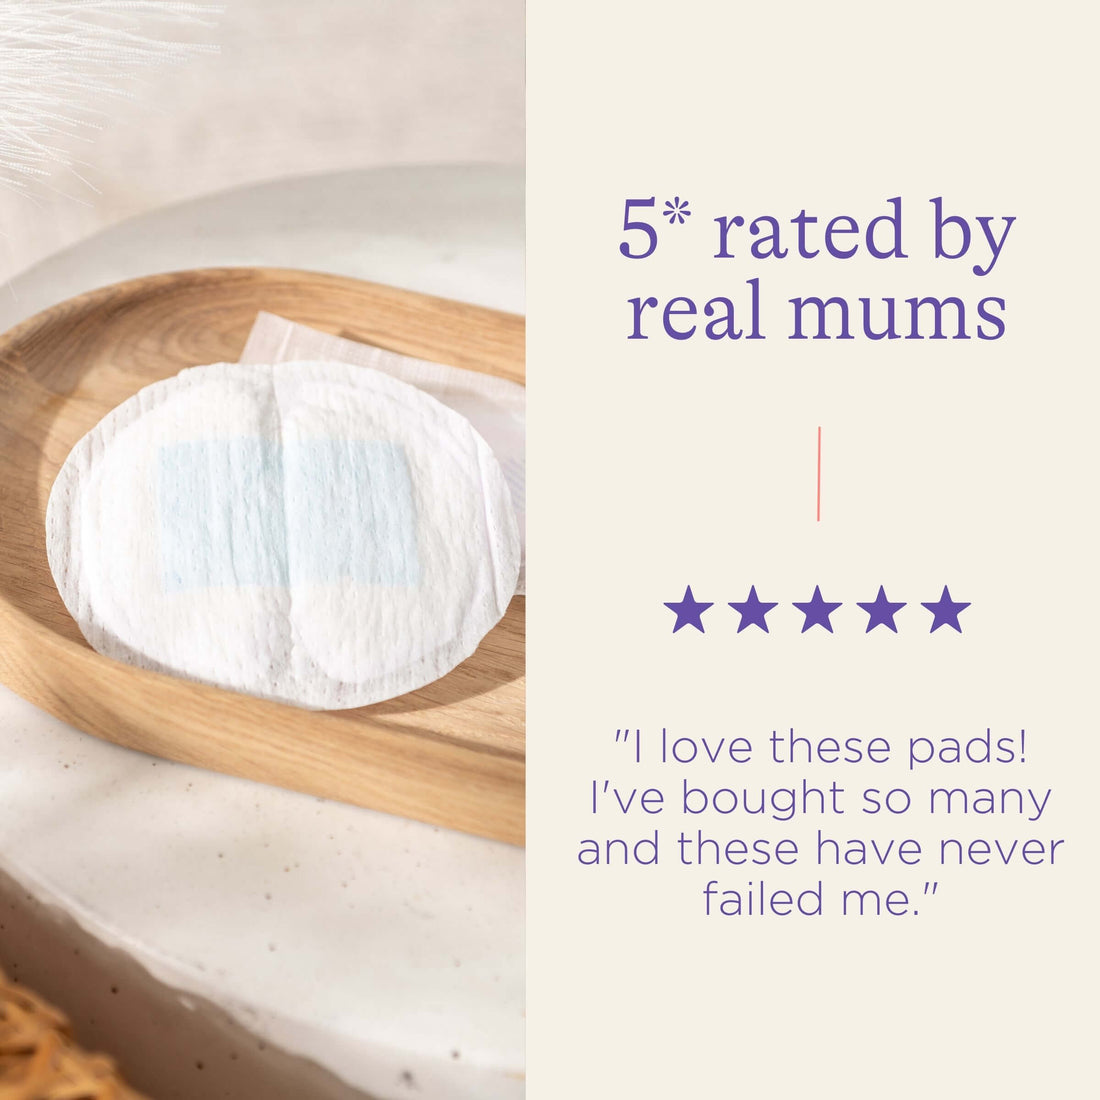 Washable/Reusable Breast Pads vs Disposable Breast Pads - Comparison and  Review - A Mum Reviews